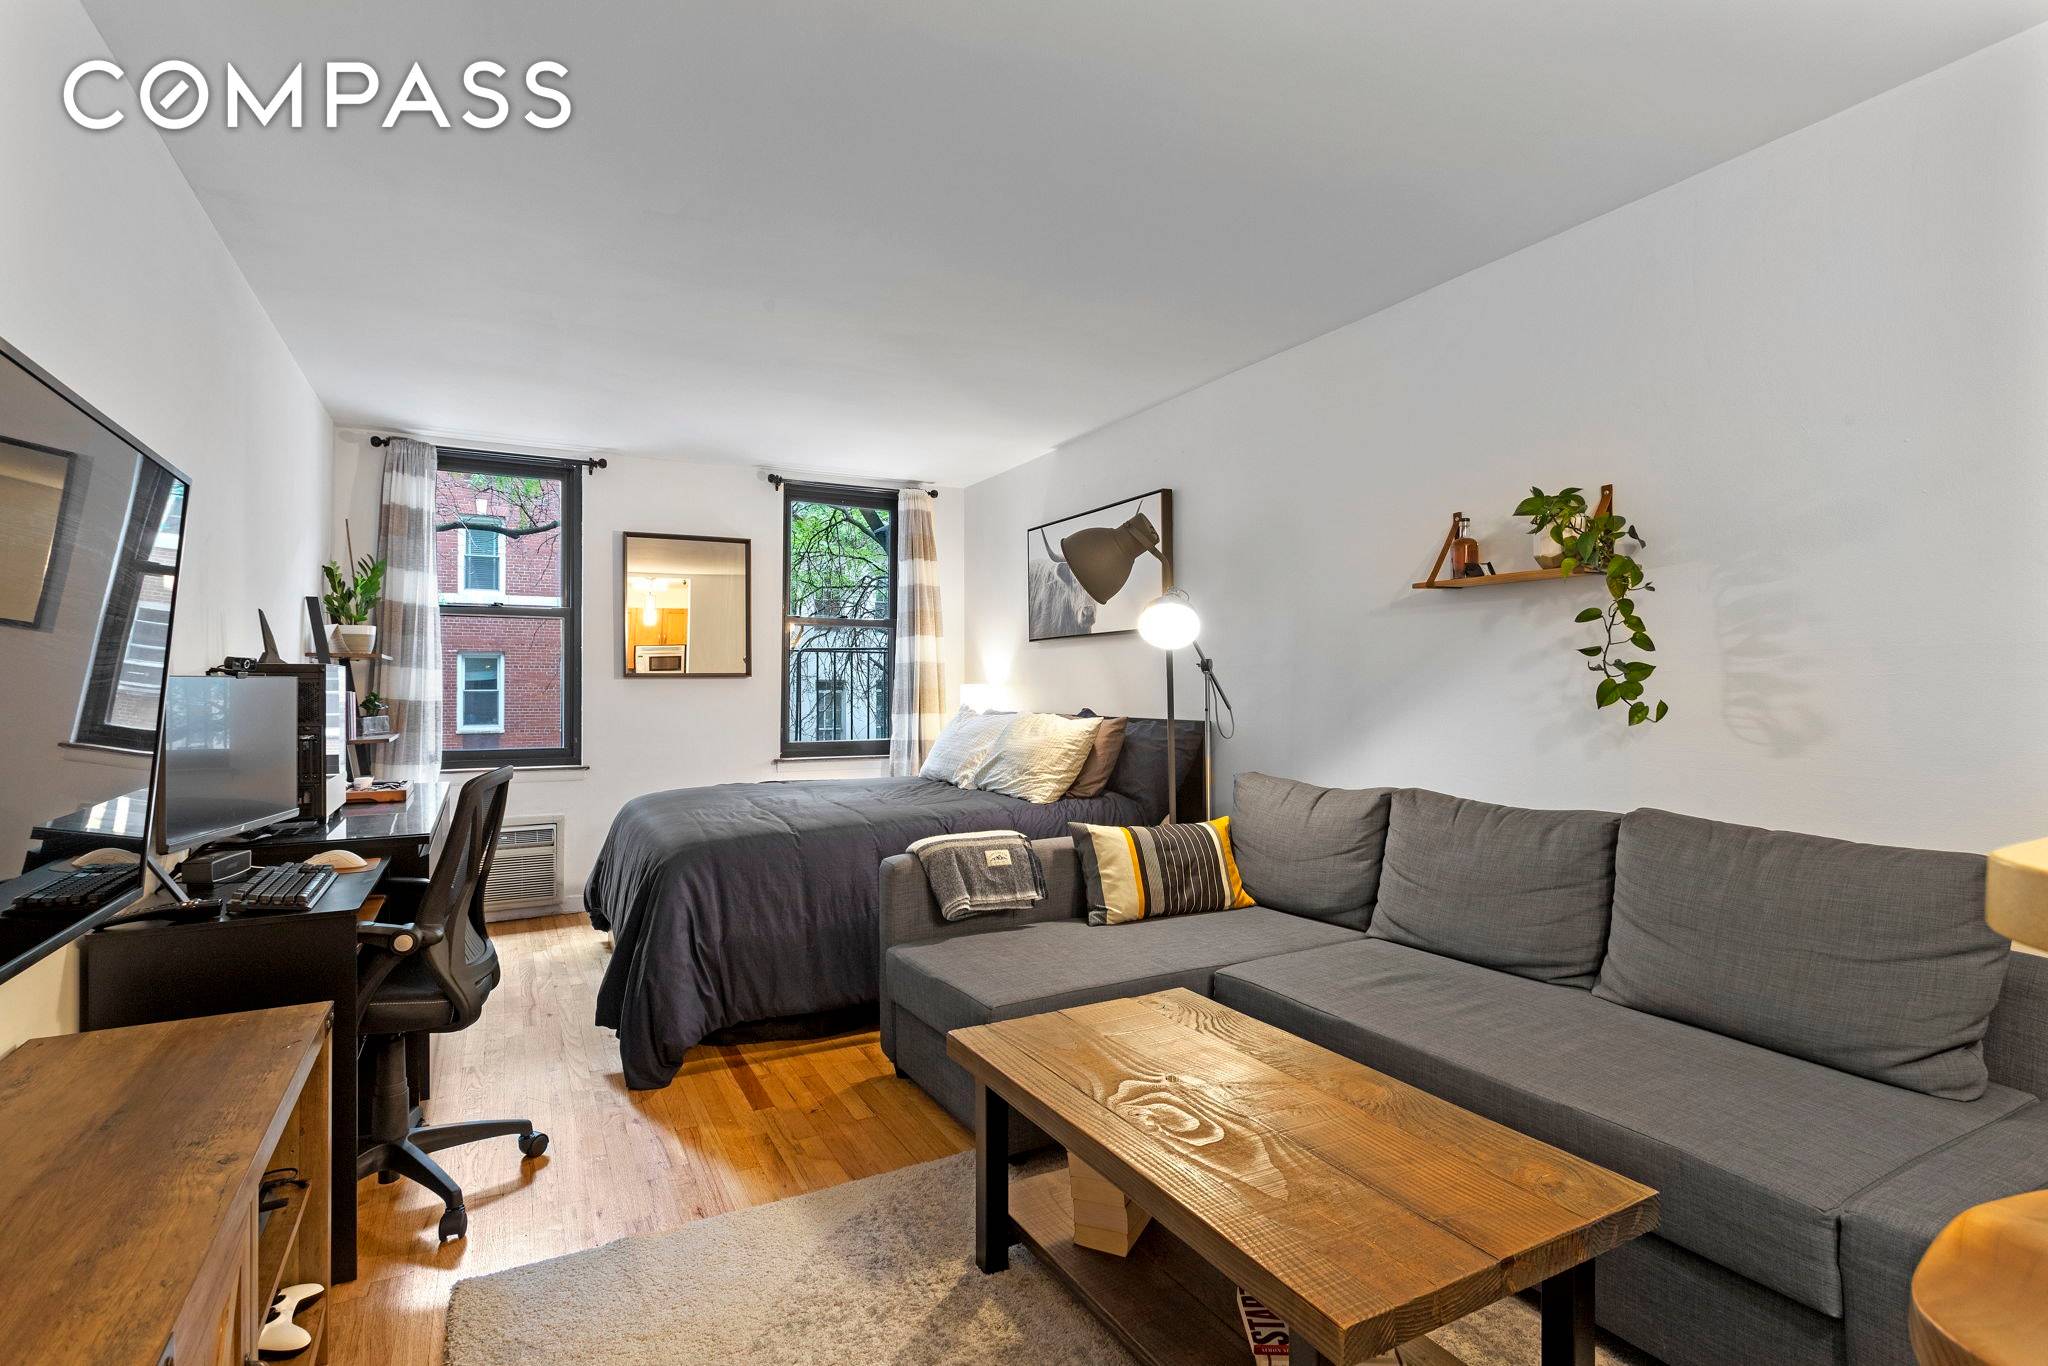 Situated on one of Hell's Kitchen's premier tree lined streets, this turnkey studio is ready to welcome you home.